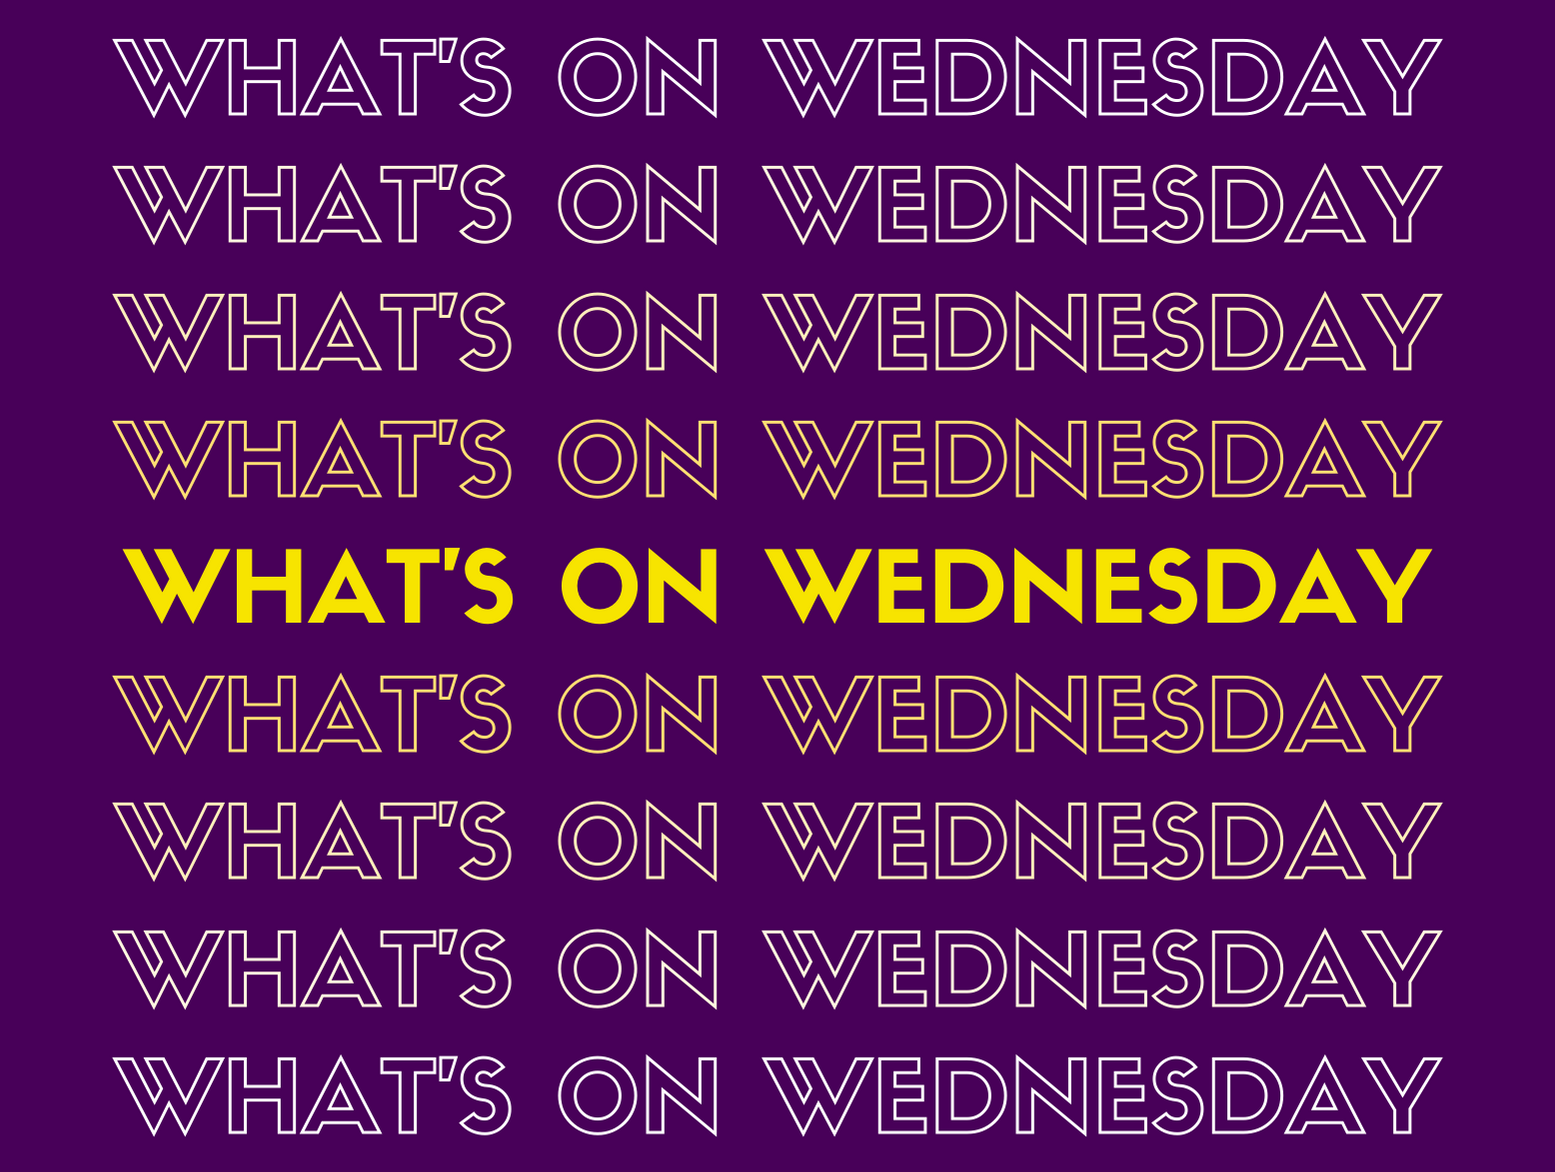 repeated What's on Wednesday gold text on a purple background